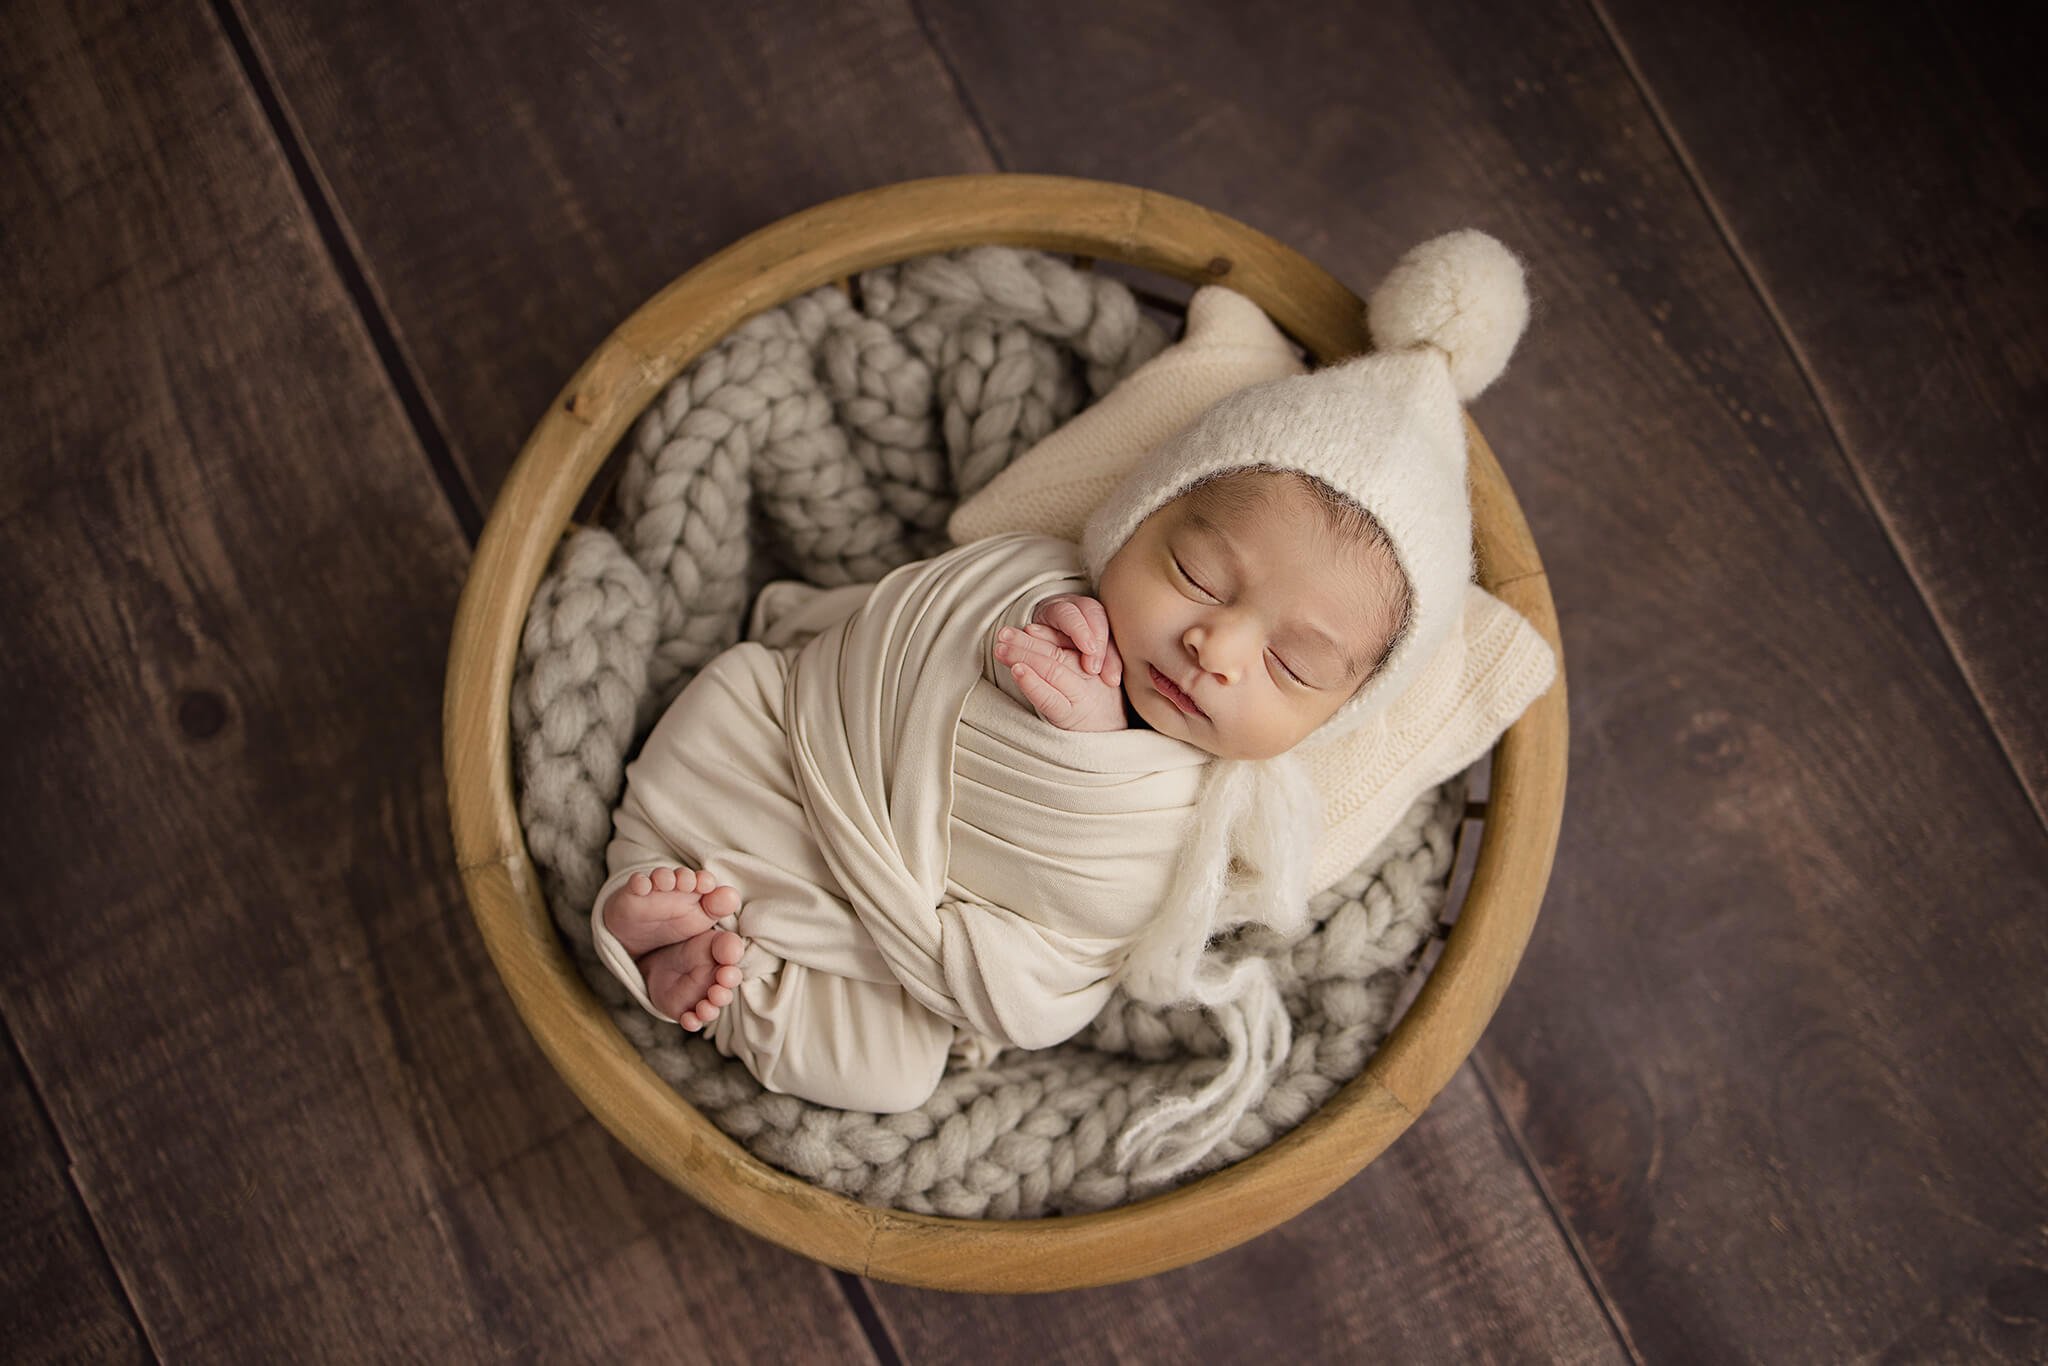 newborn photography near me, newborn photography packages, in home infant photography toronto